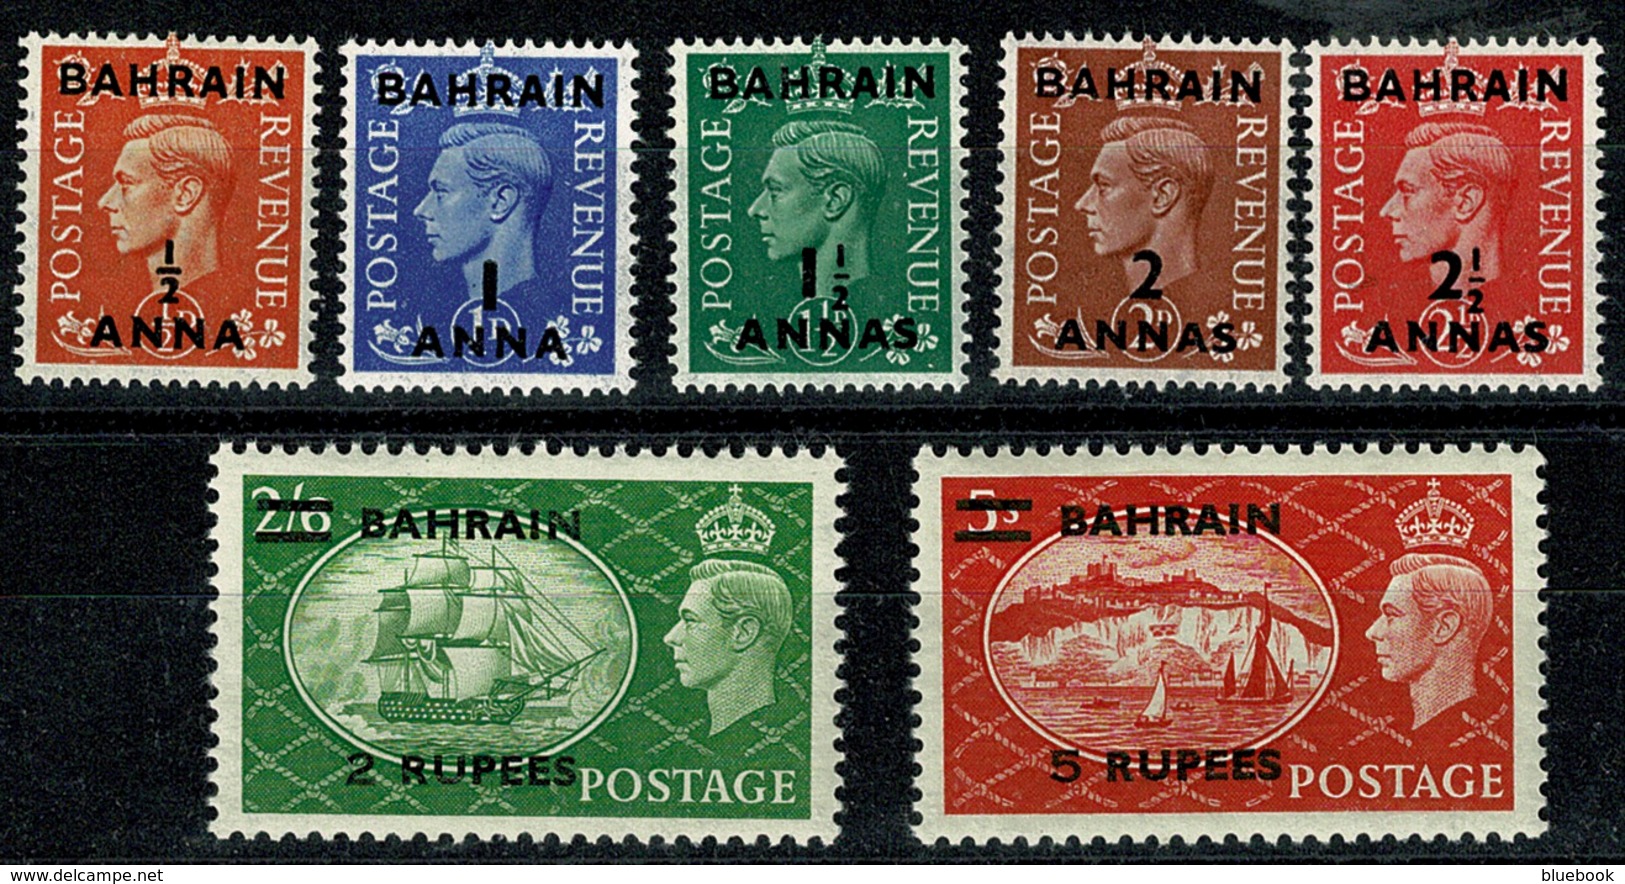 Ref 1292 - GB Stamps - British Overprints In Bahrain 1950 MNH SG 71-78 (less 4a) - Bahrain (...-1965)